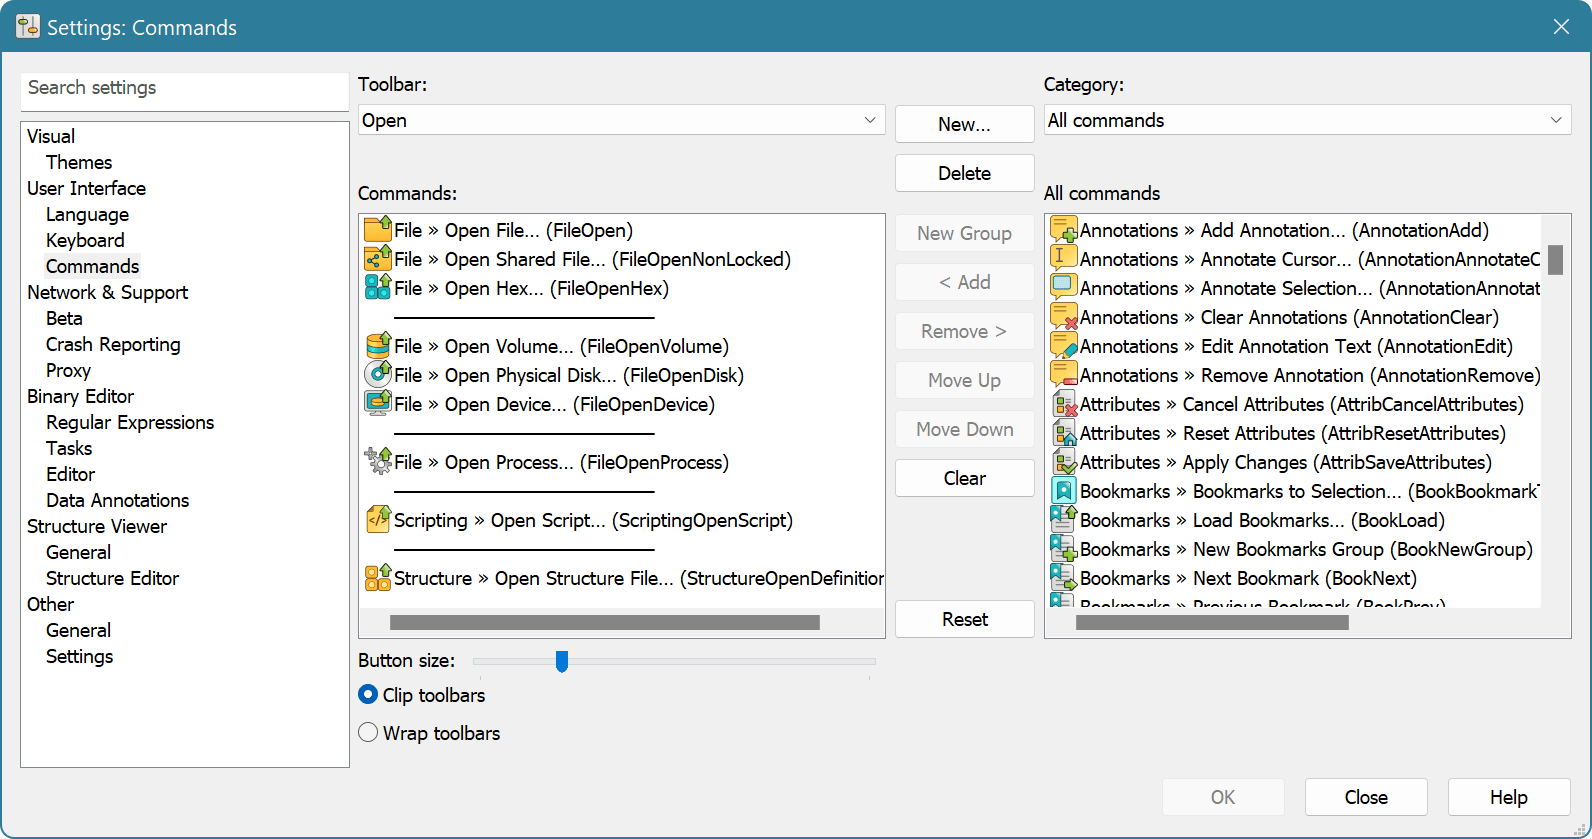 Commands Settings Page